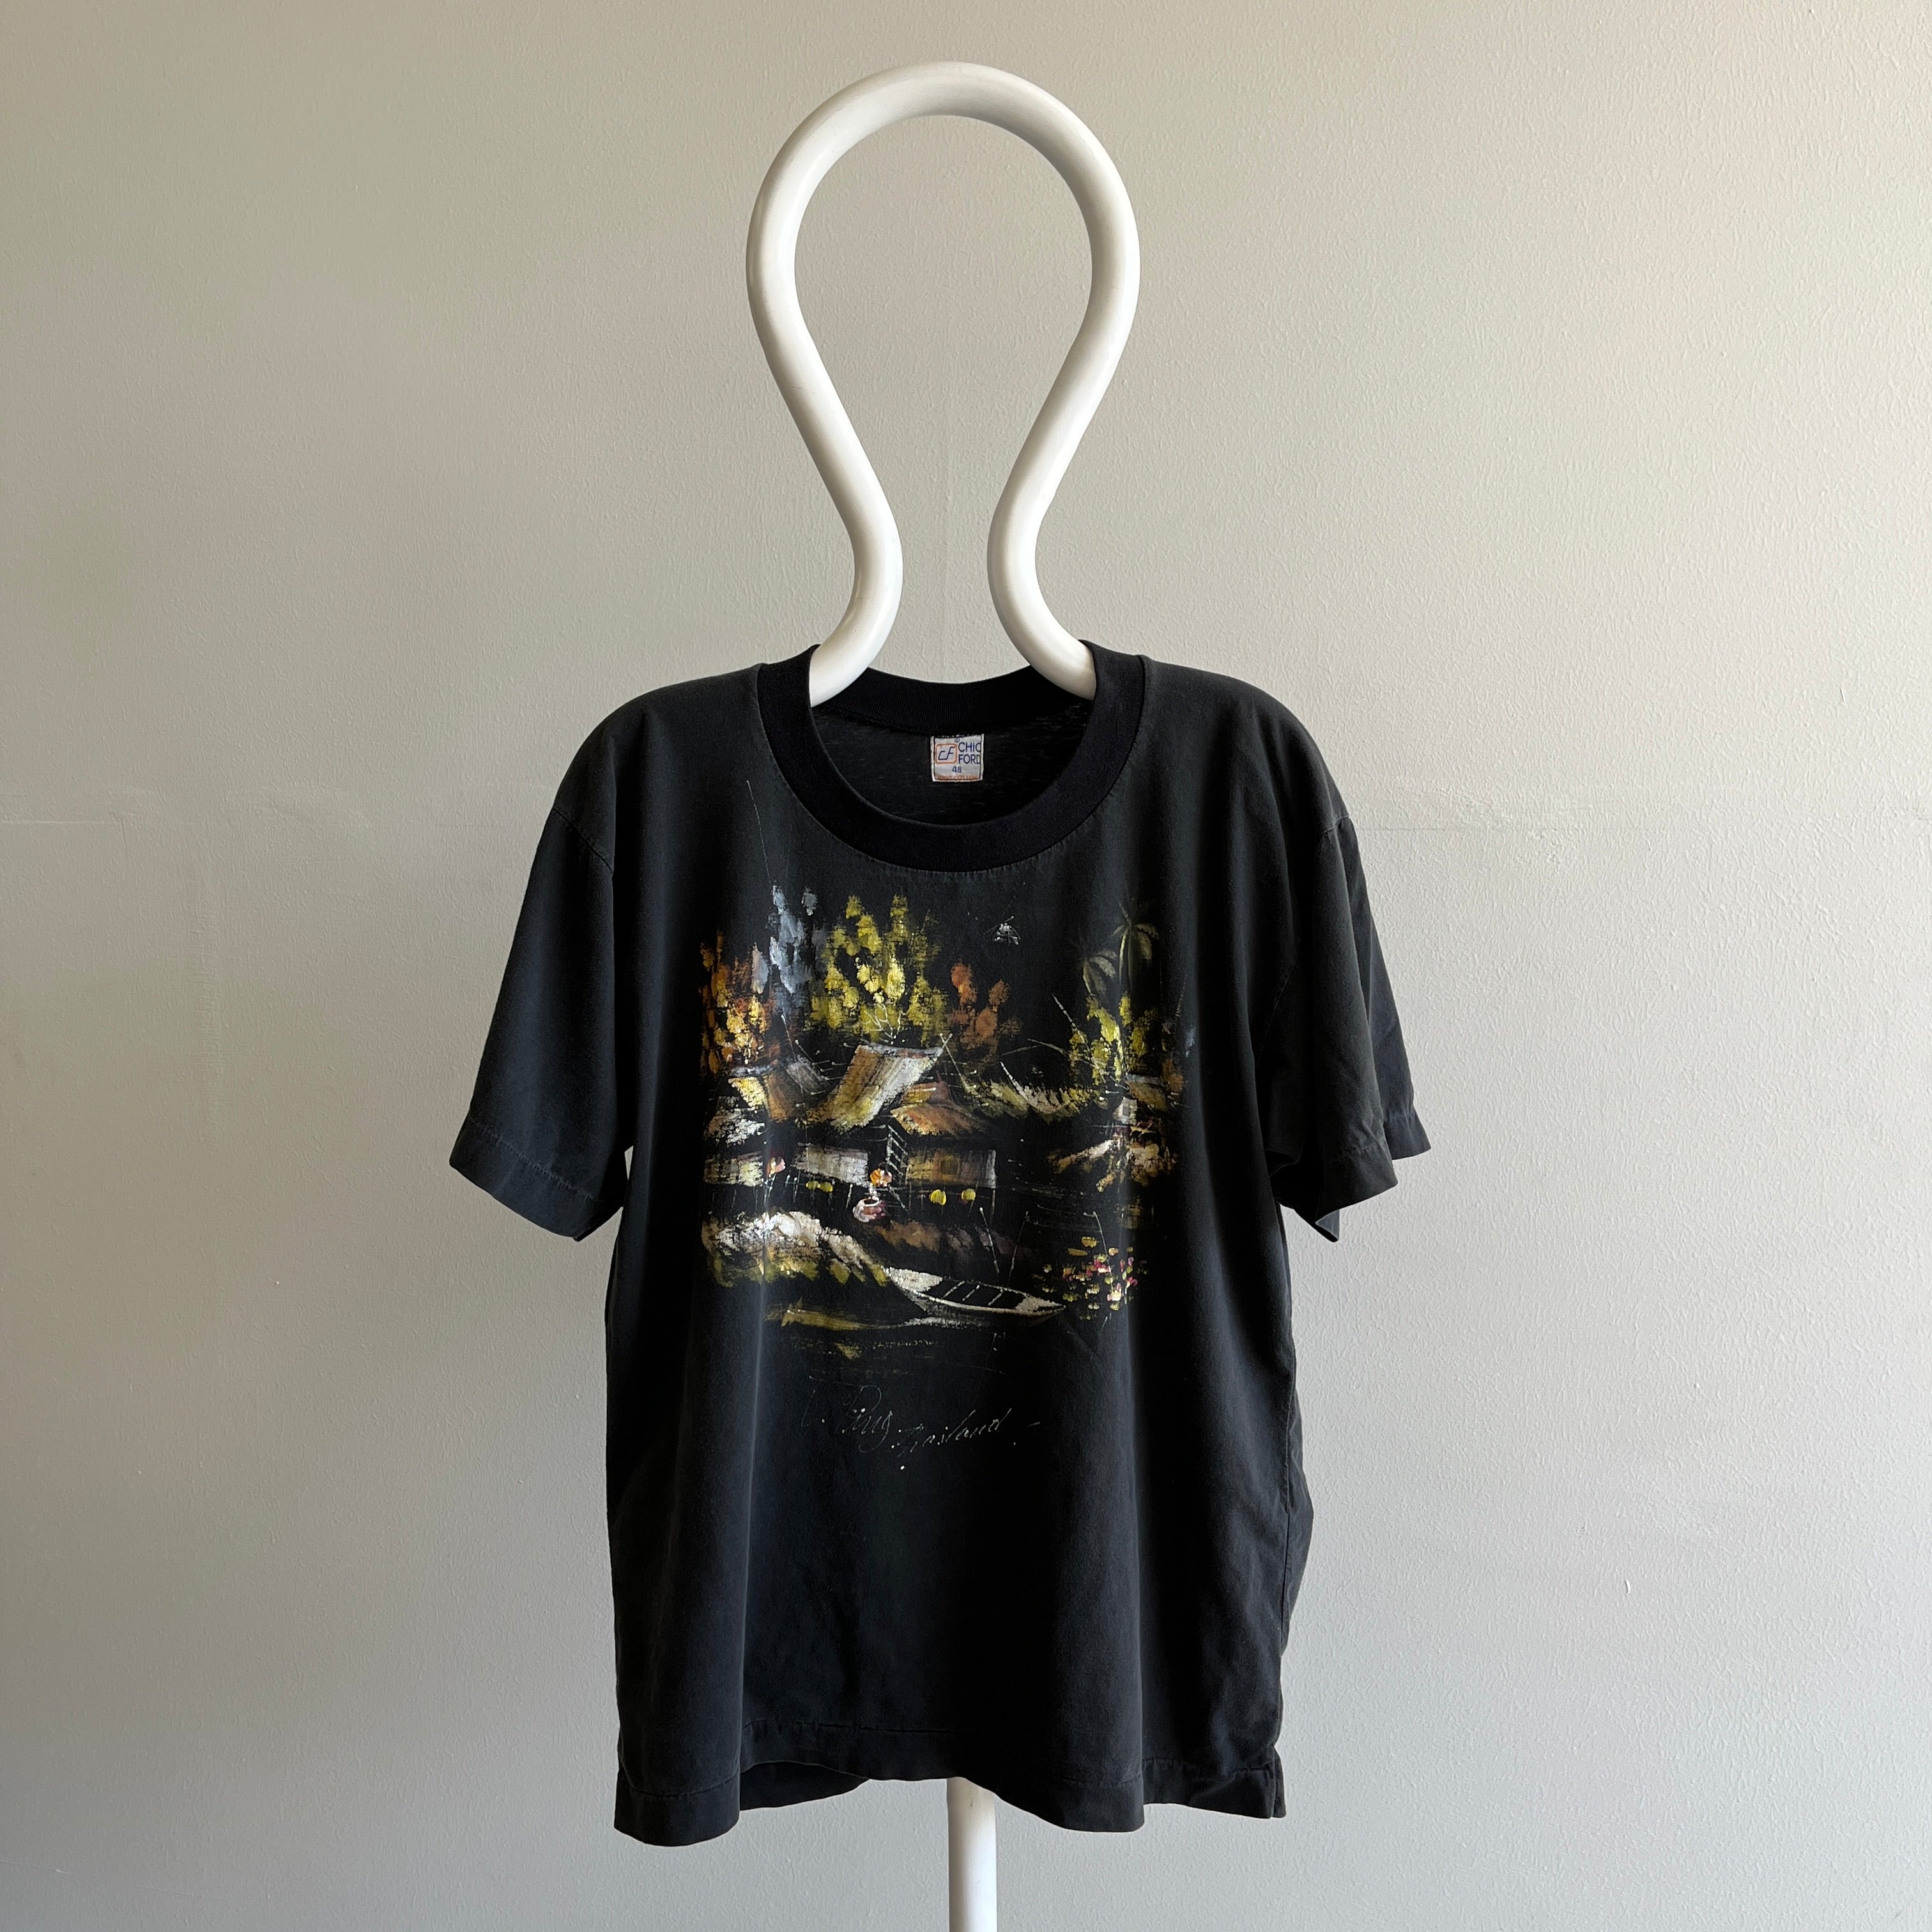 1980/90s Thailand Tourist T-Shirt - Hand Painted and Great Slouchy Sleeves